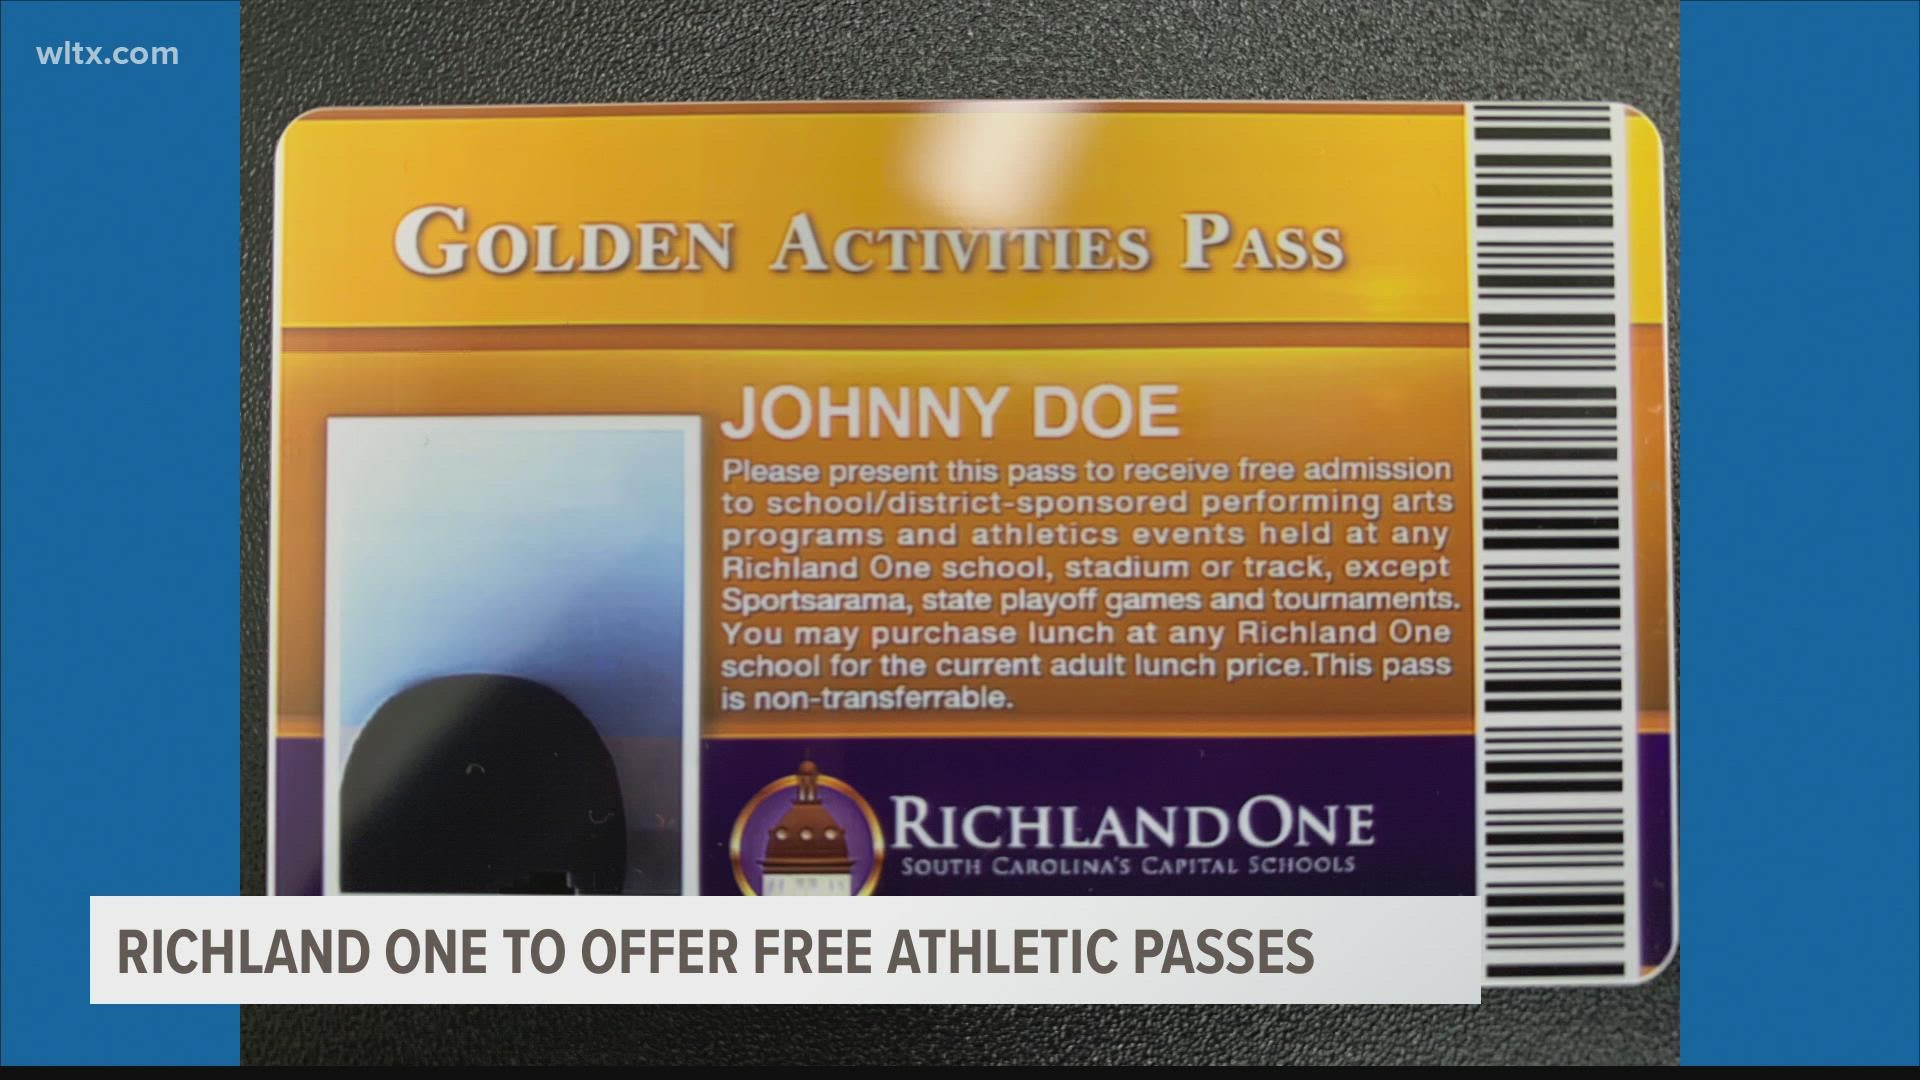 Richland One says it is now offering anyone 60 or older who lives in it's attendance zone a free golden activities ticket to attend athletic events.